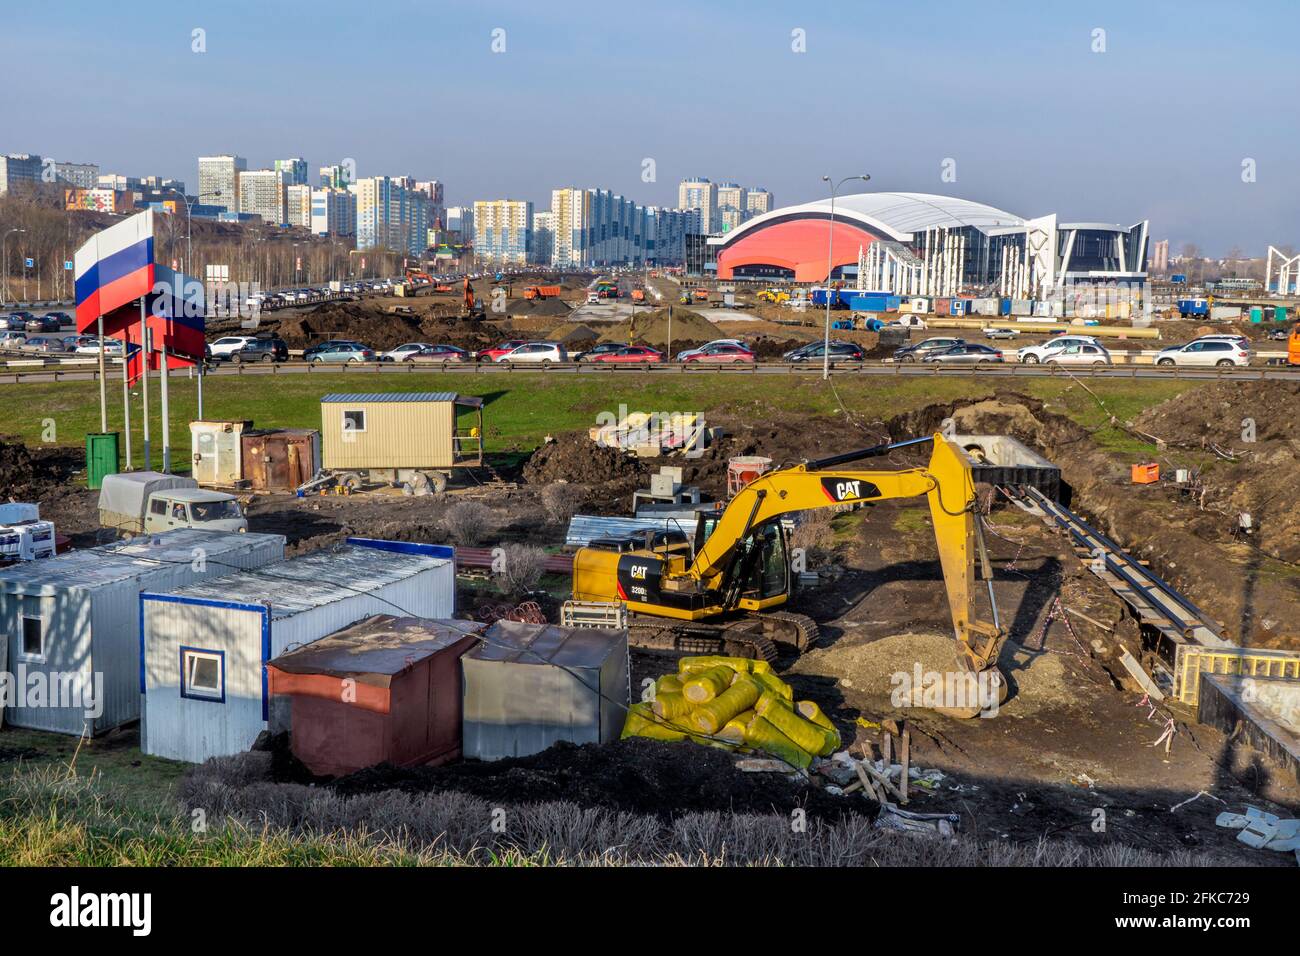 Kemerovo, Russia - 29 april 2021. Construction of communications in the Kuzbass Arena area along Pritomsky Avenue and construction sites Stock Photo